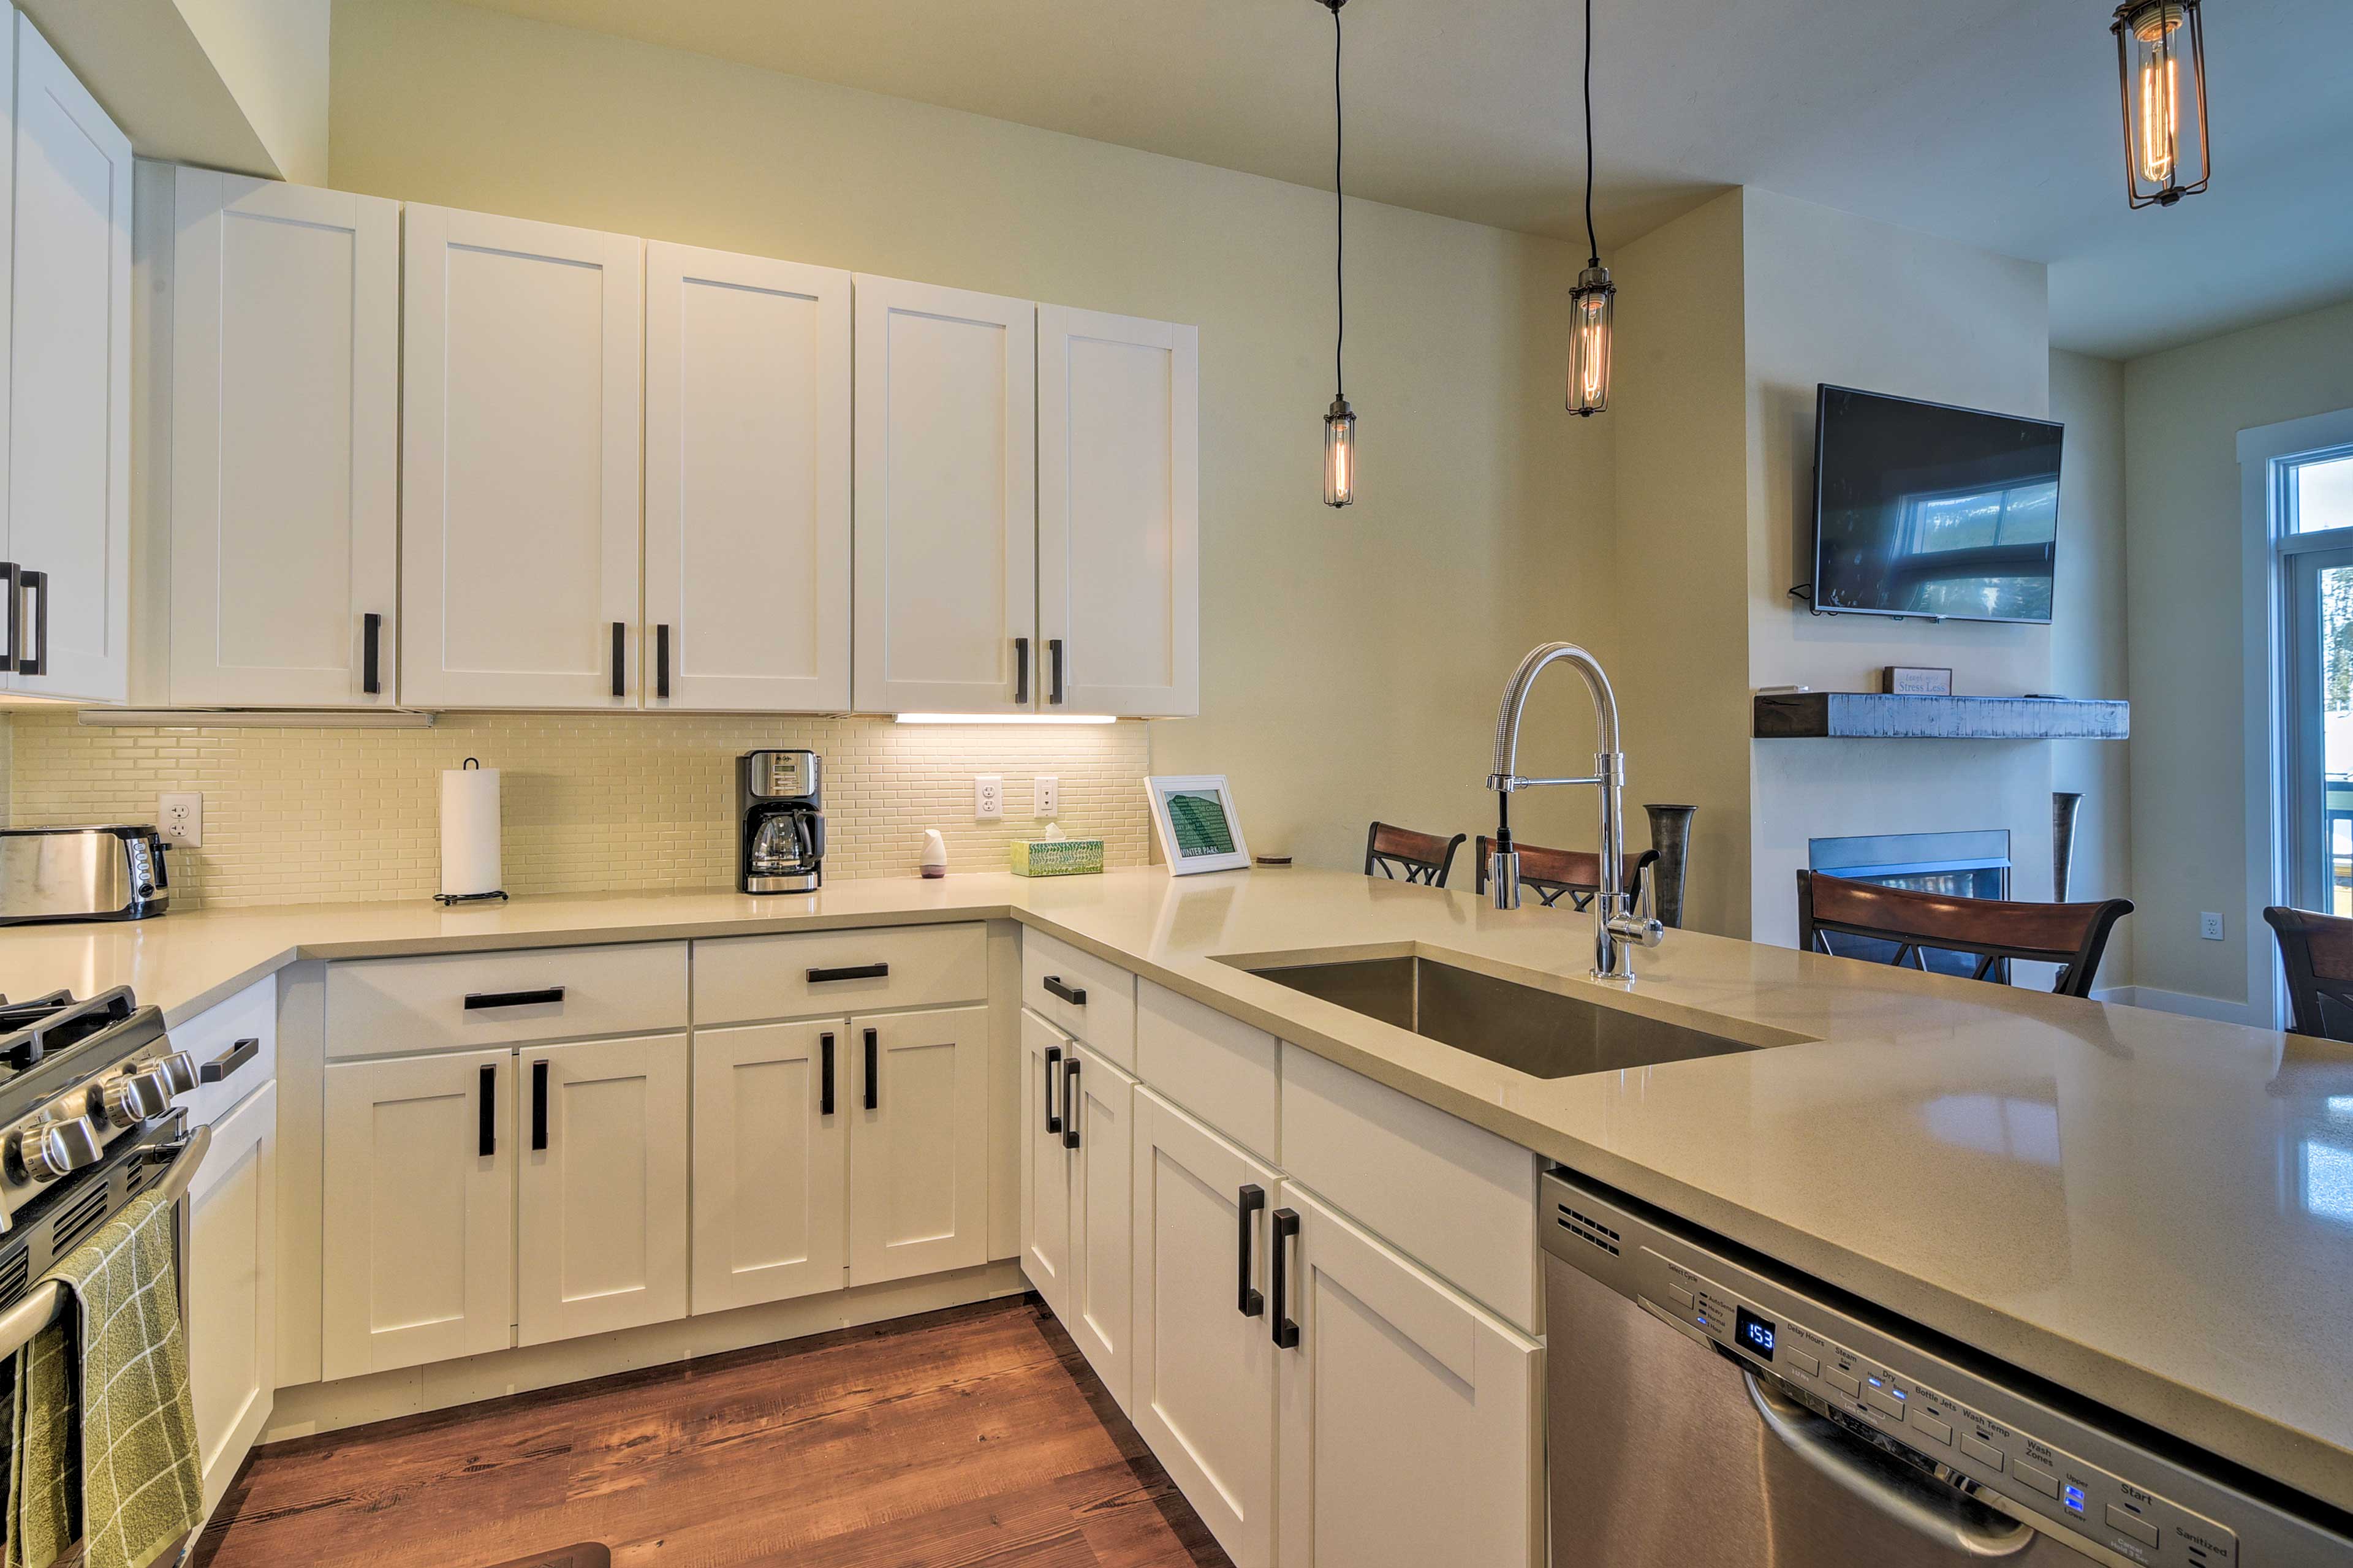 The kitchen features expansive countertops and a 4-person breakfast bar.